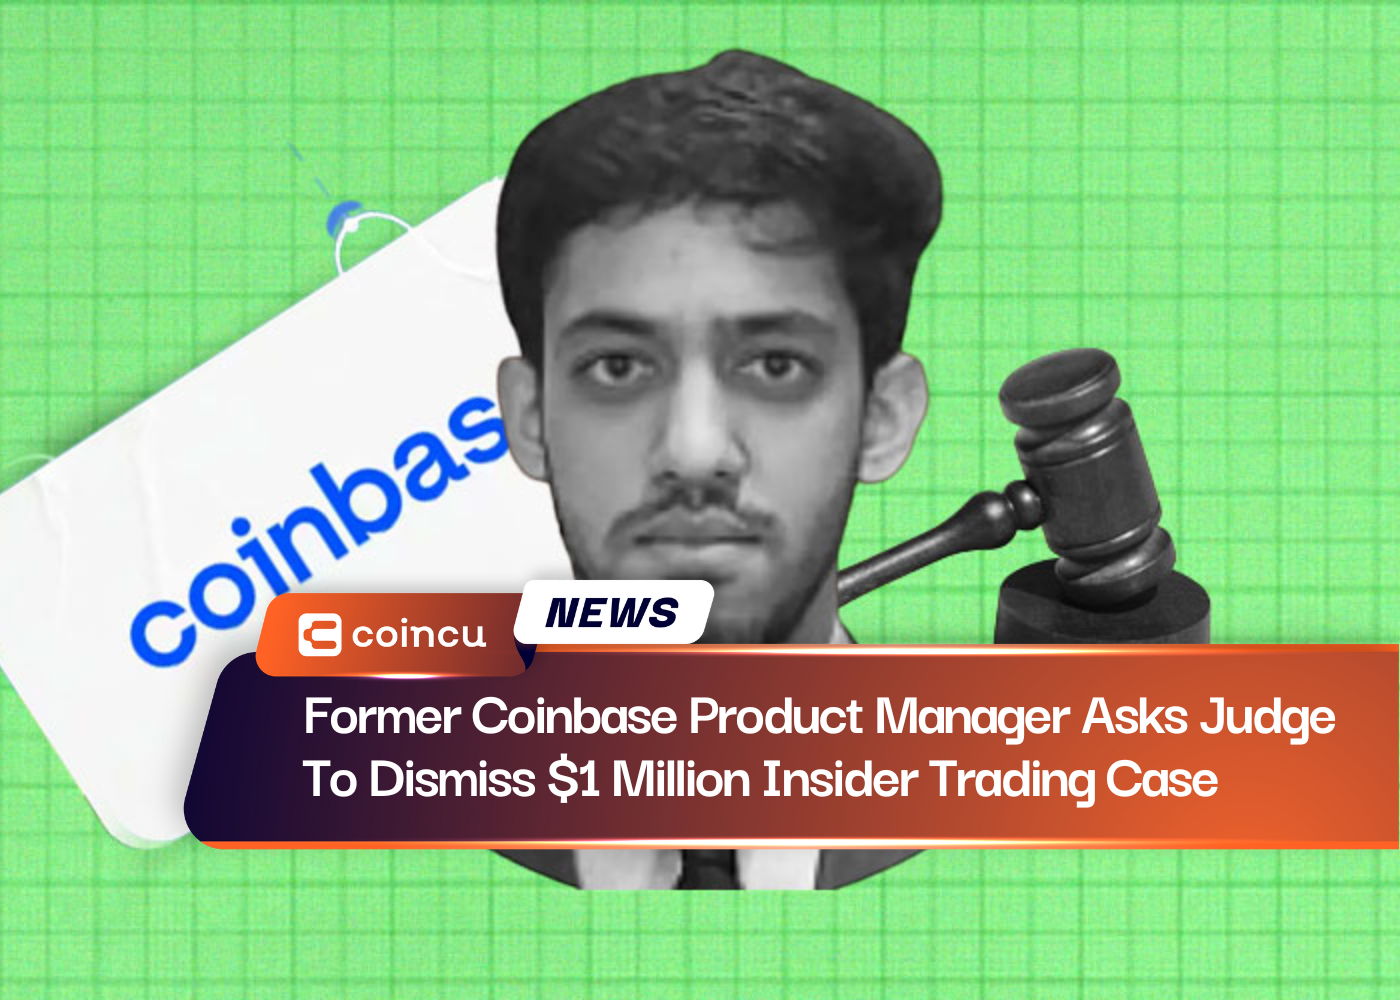 Former Coinbase Product Manager Asks Judge To Dismiss $1 Million Insider Trading Case